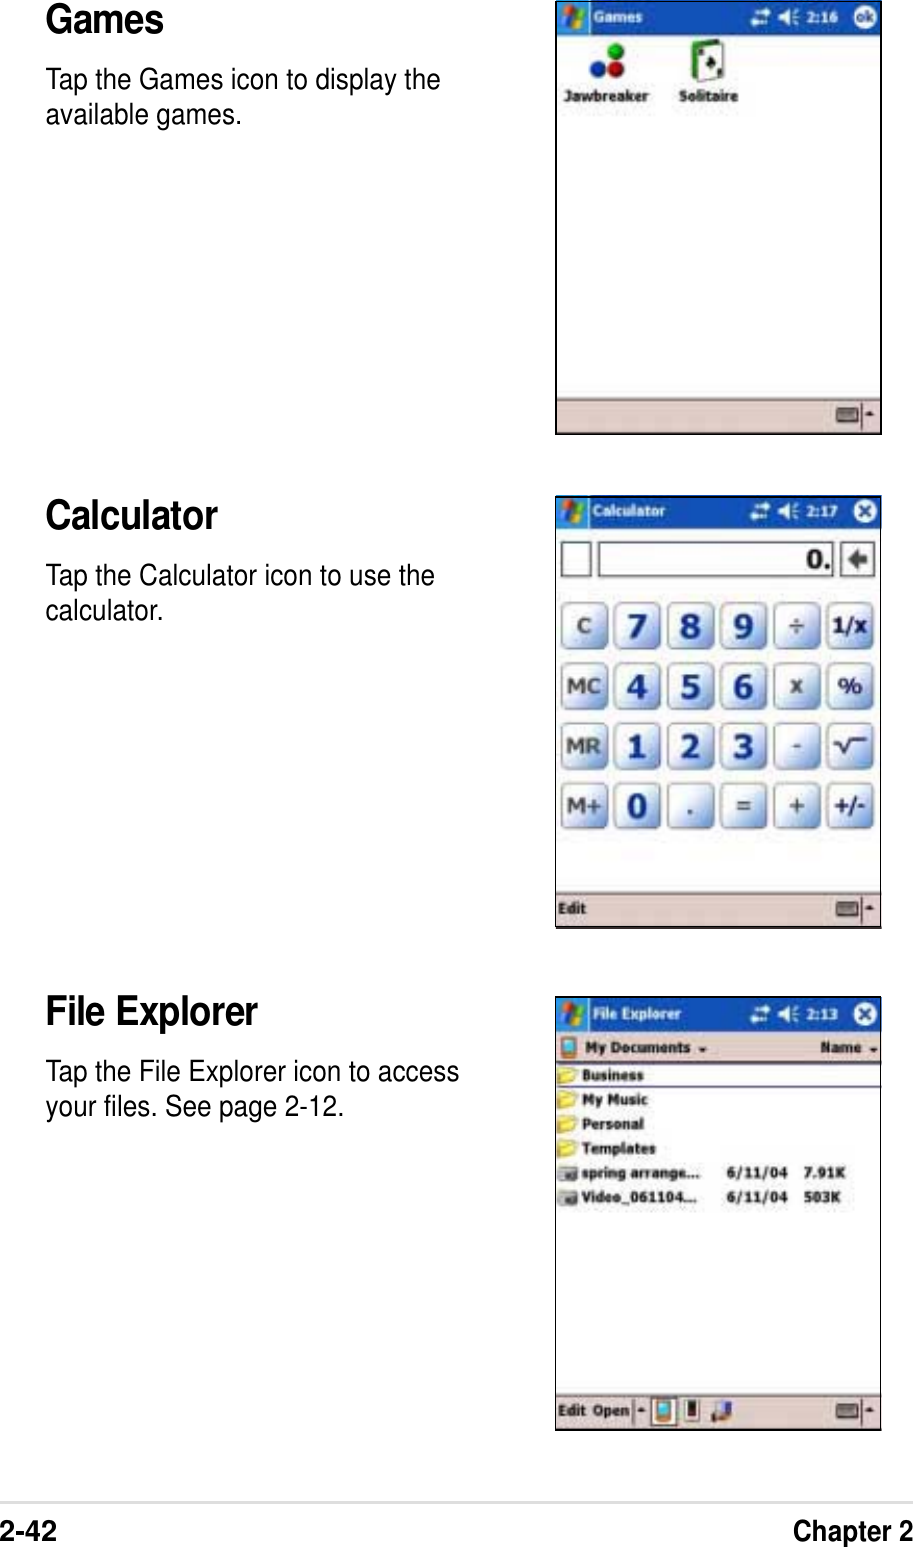 2-42Chapter 2CalculatorTap the Calculator icon to use thecalculator.File ExplorerTap the File Explorer icon to accessyour files. See page 2-12.GamesTap the Games icon to display theavailable games.